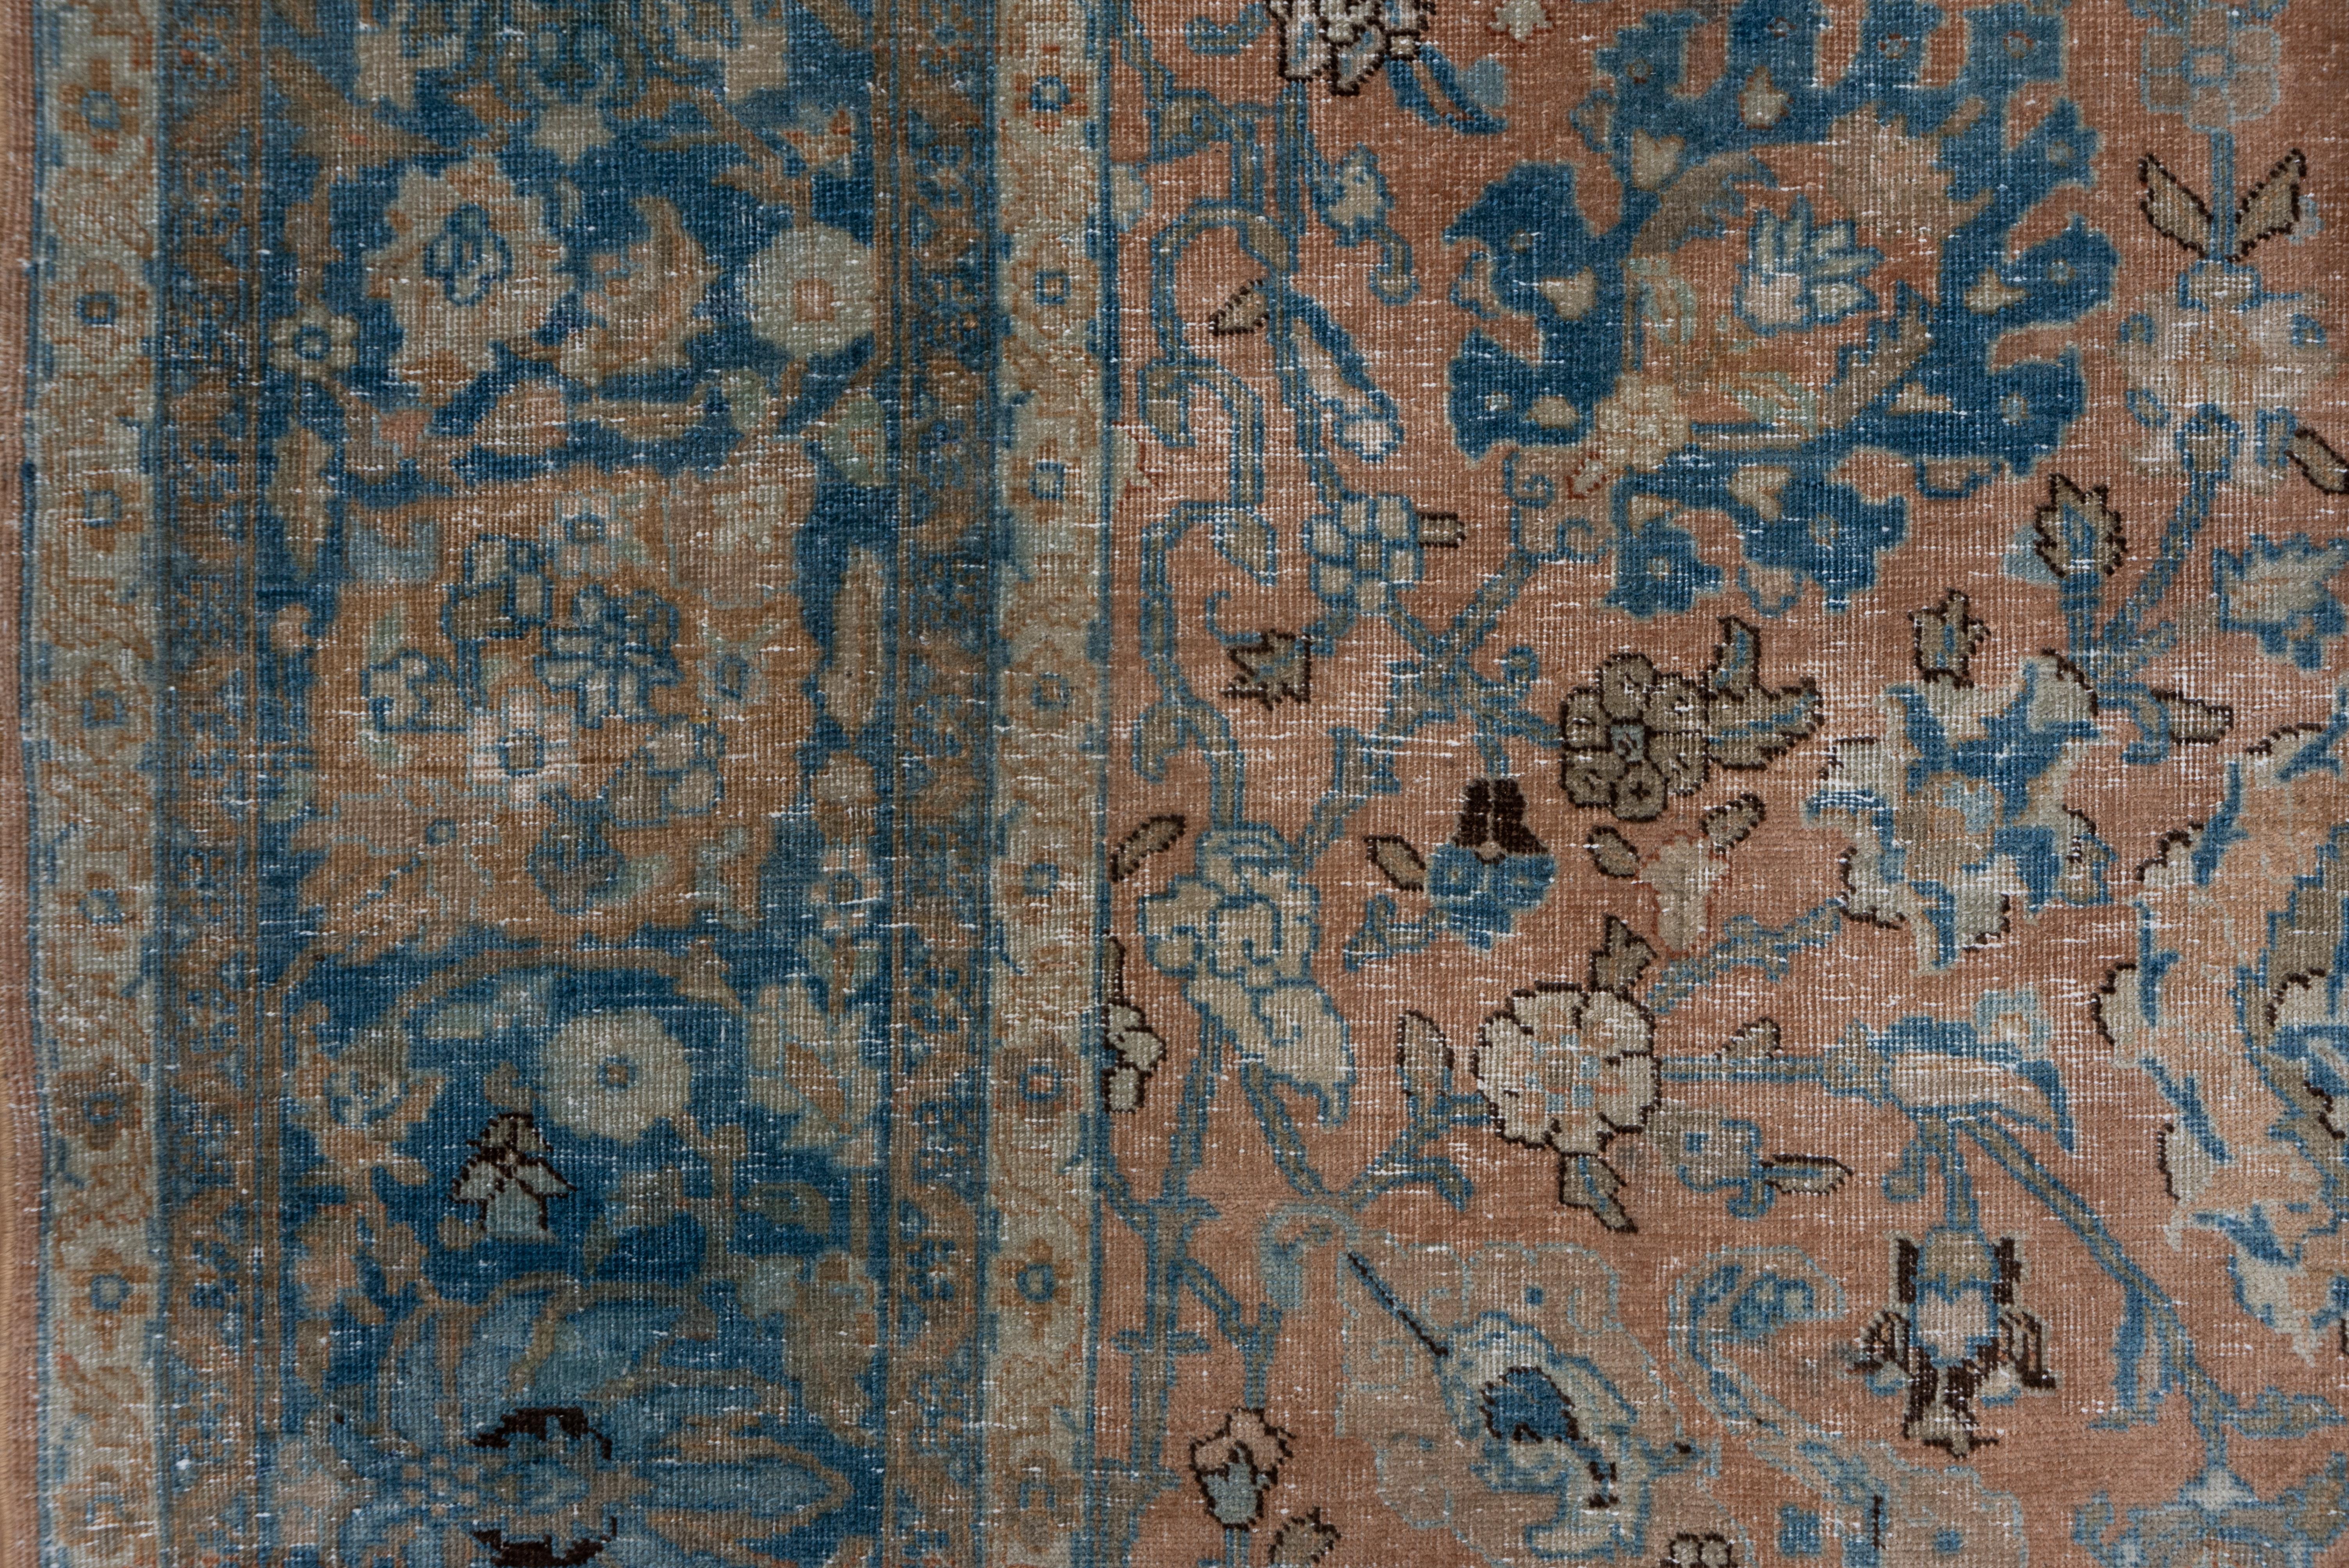 Hand-Knotted Antique Persian Tabriz Carpet, Peach Field & Blue Borders